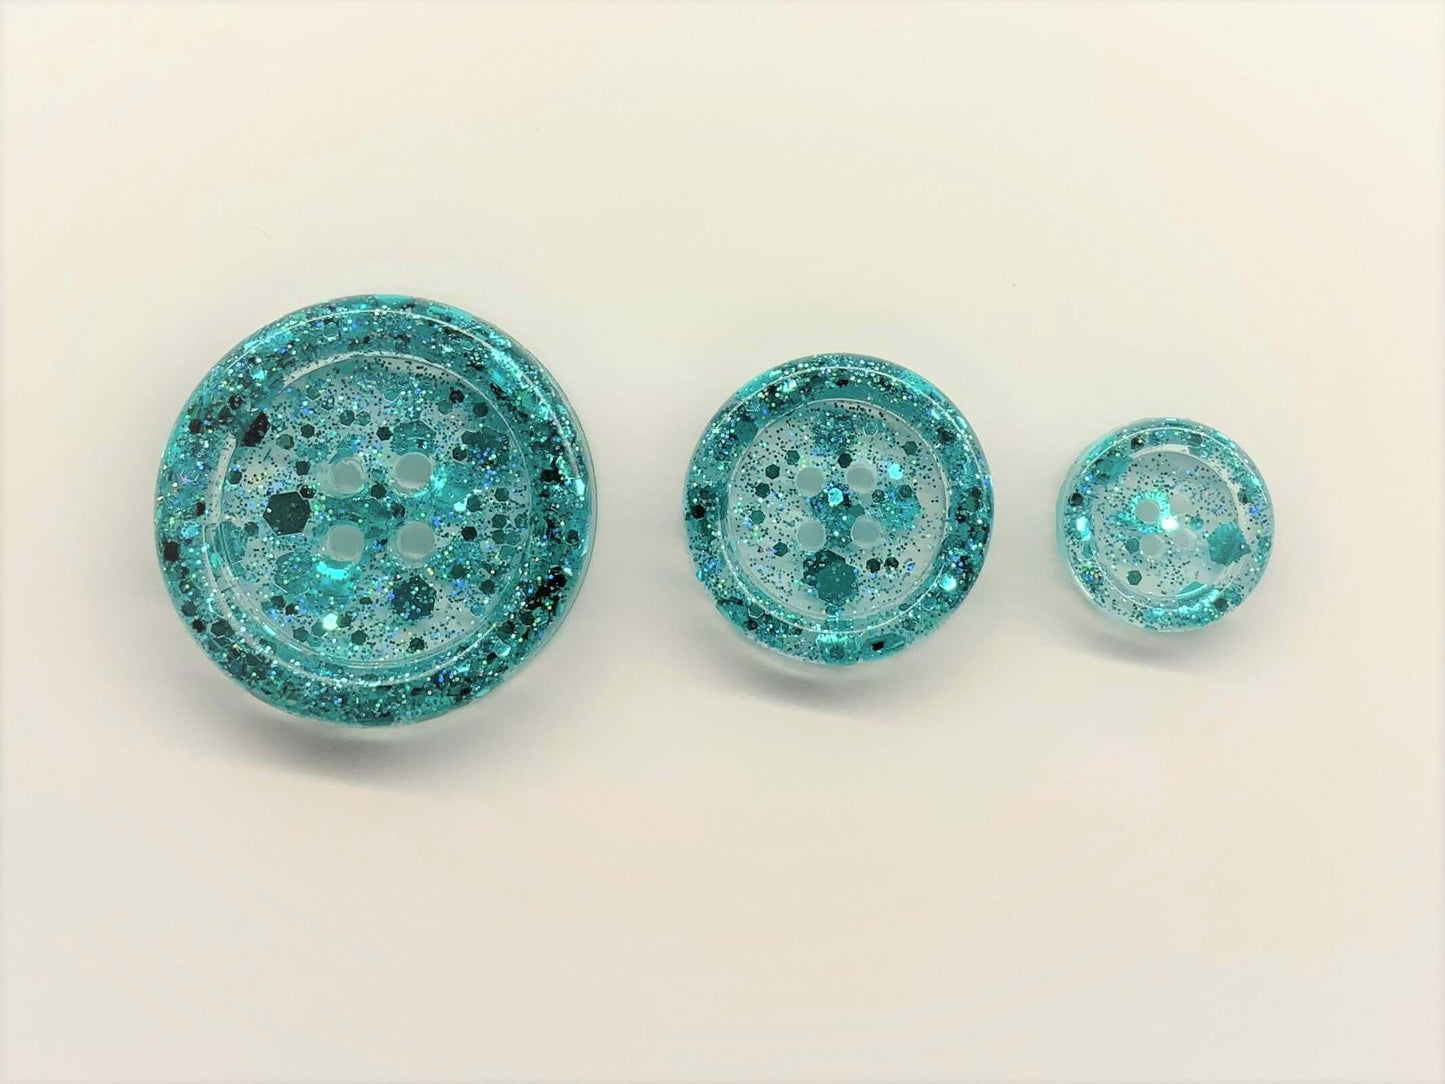 Turquoise Buttons - B006